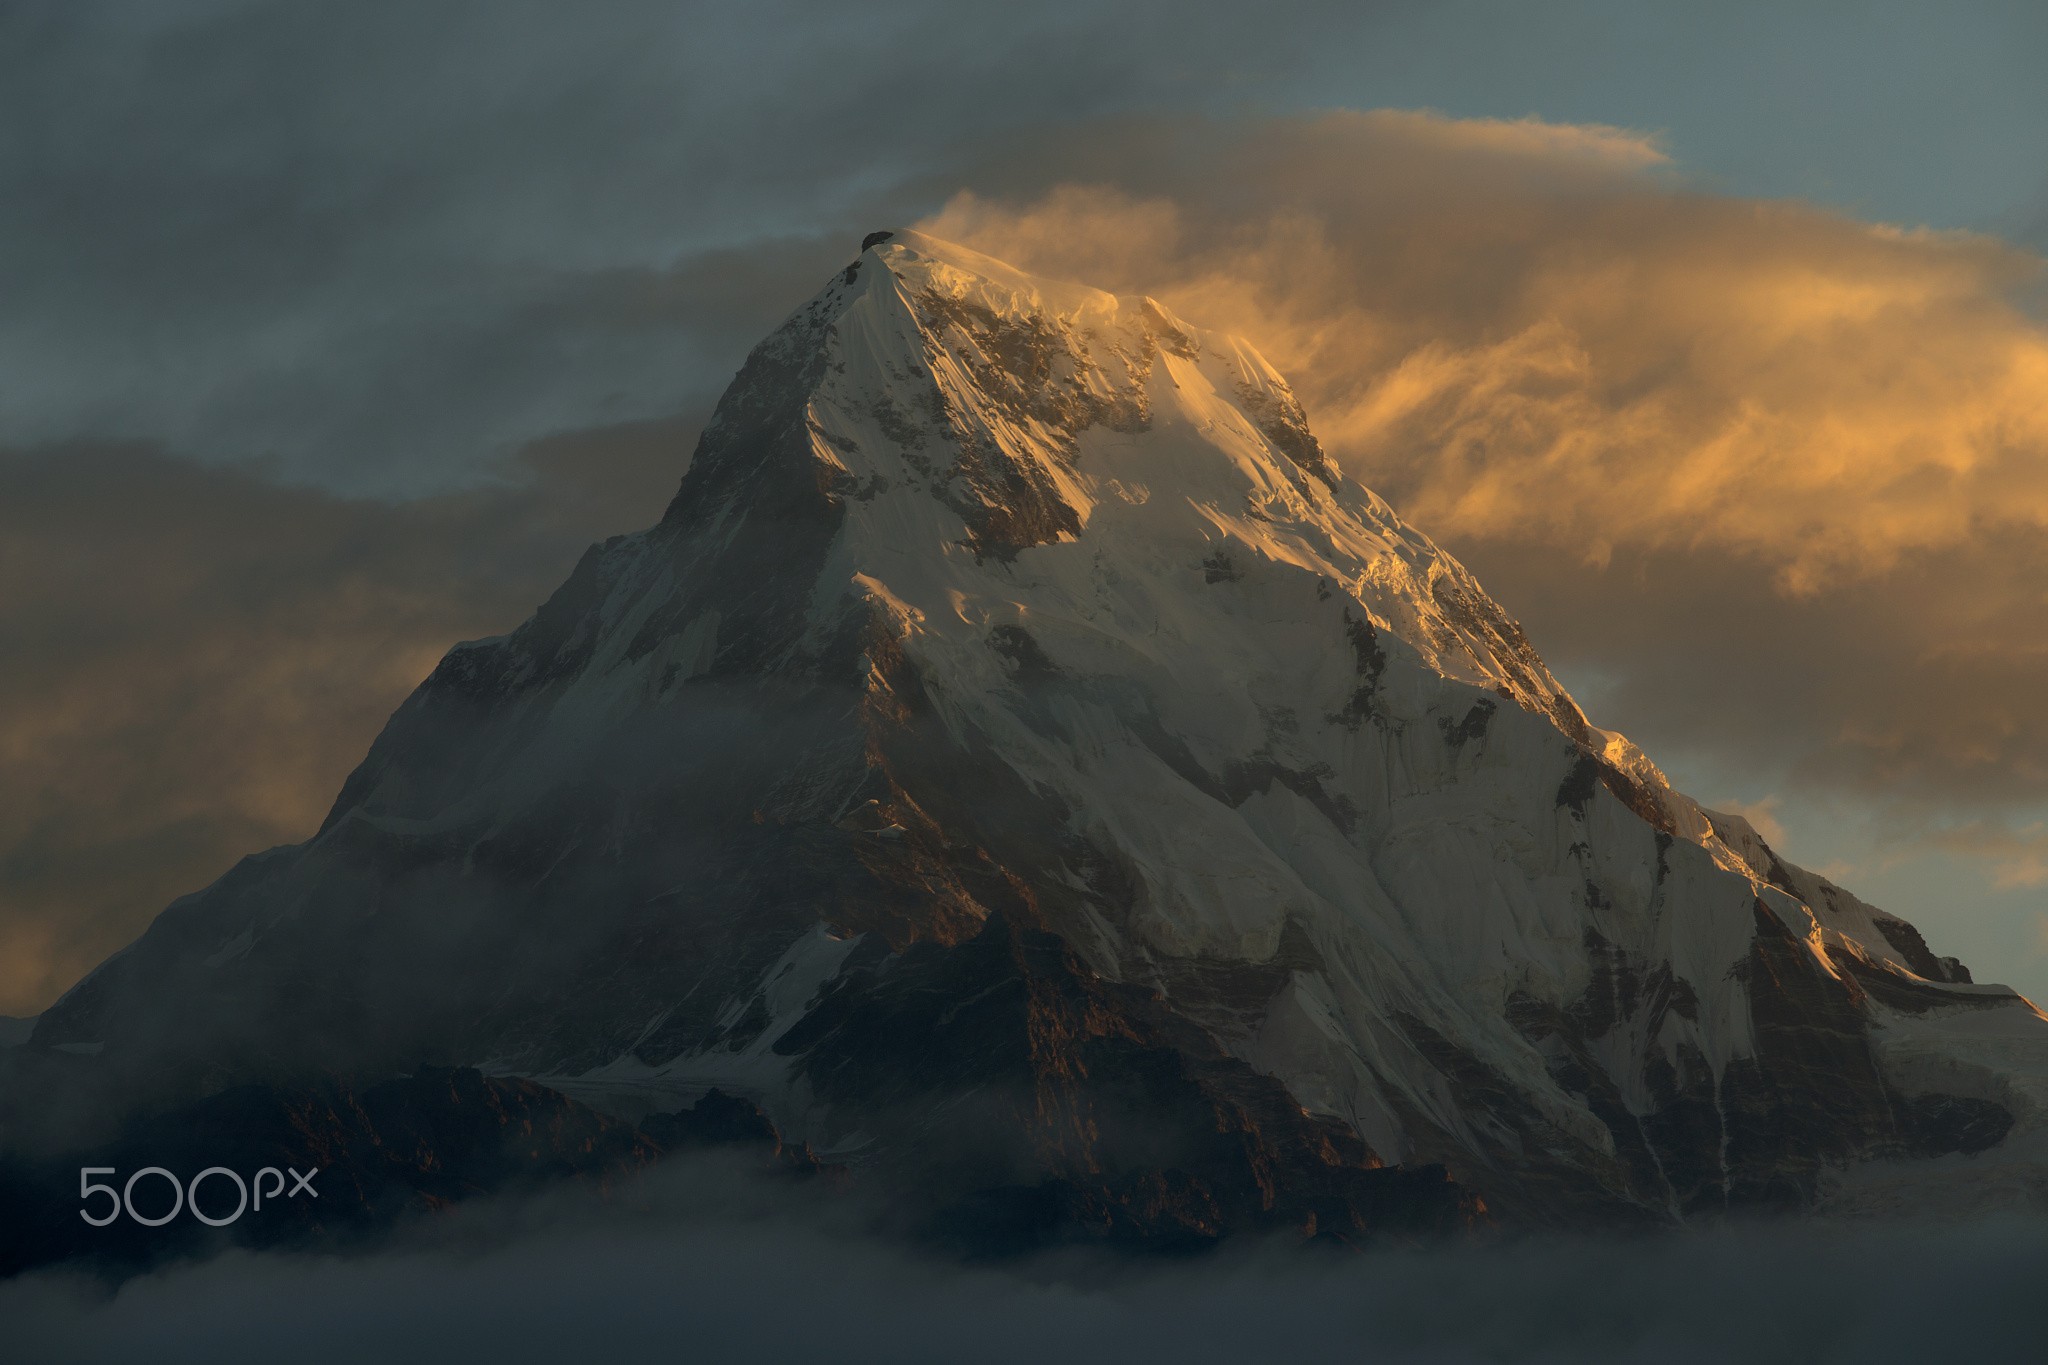 General 2048x1365 500px photography landscape Nepal mountains sunlight nature snowy peak snow ice cold